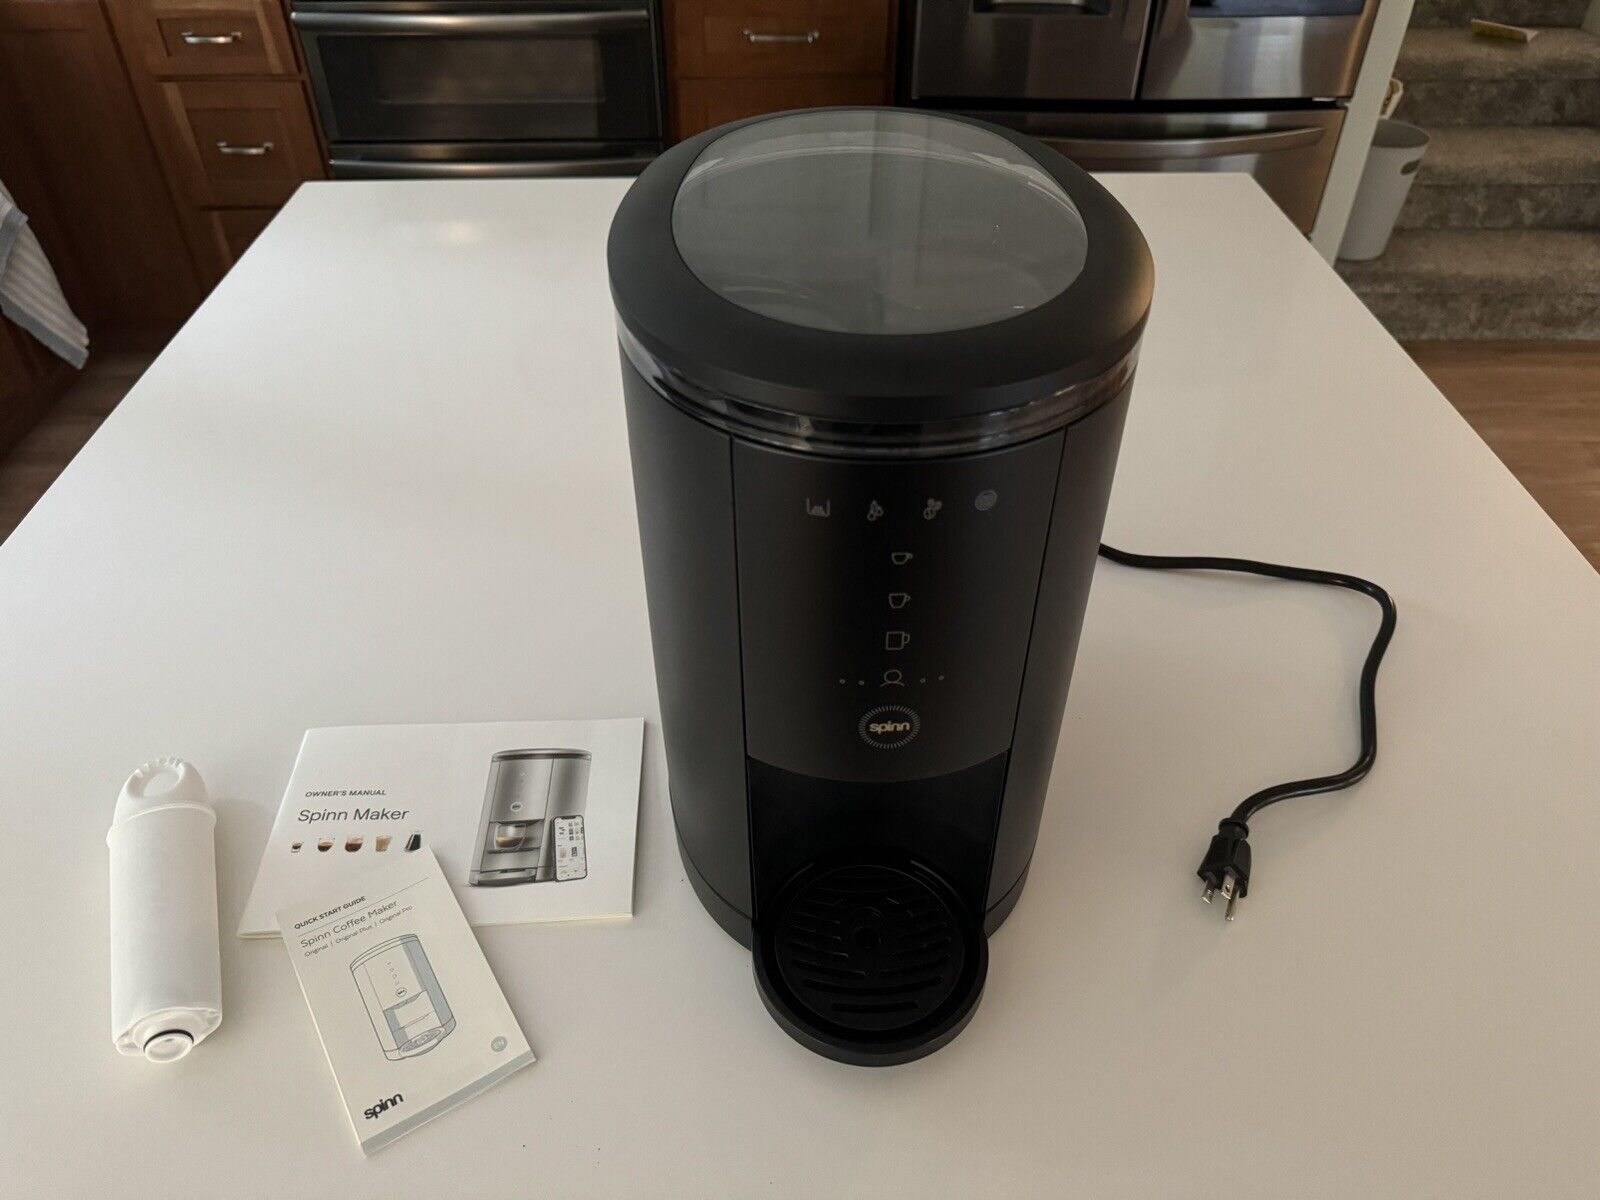 Spinn WiFi enabled coffee maker with Extra Large Water Reservoir